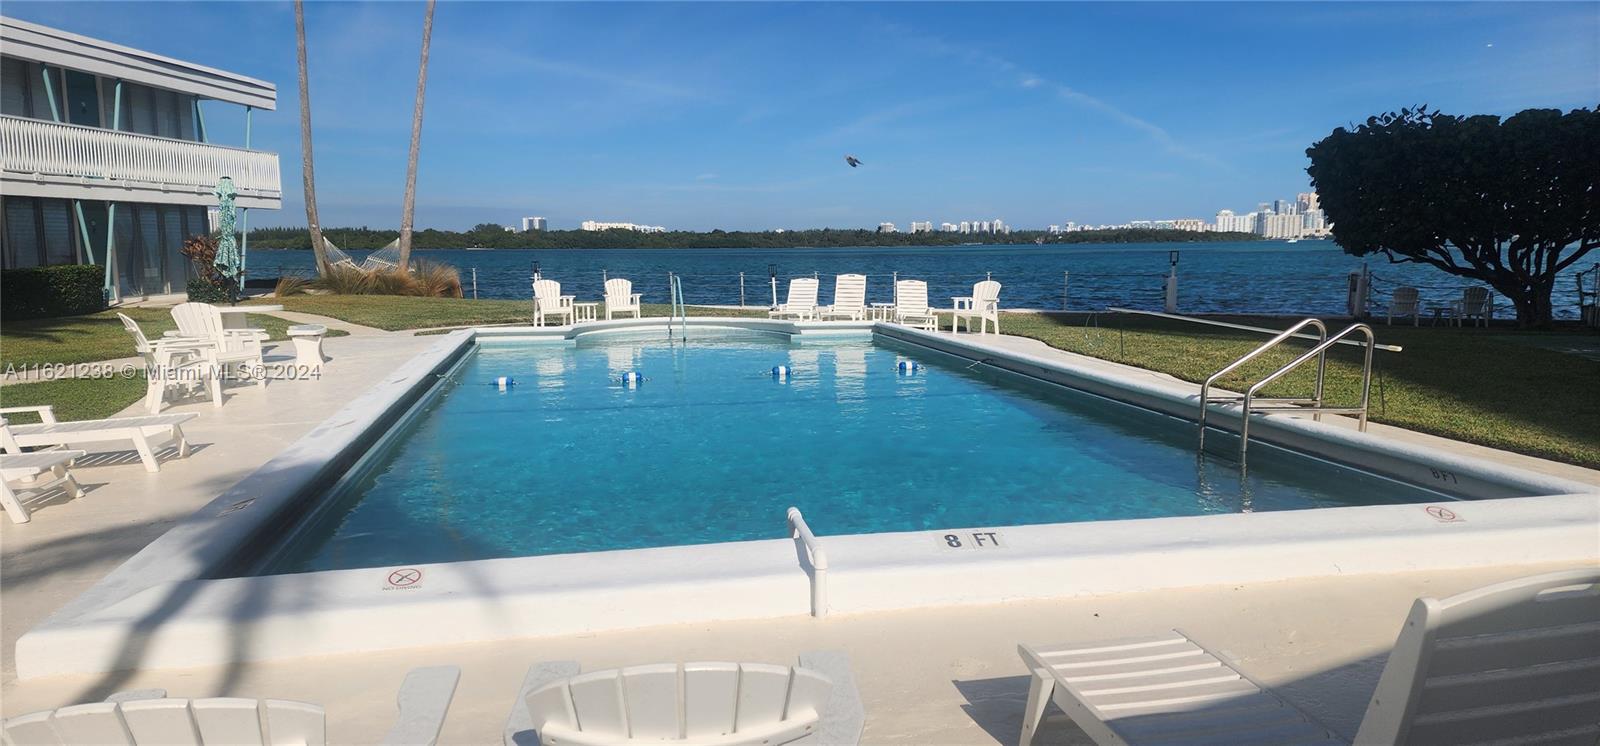 A price to Brag about! Waterfront living awaits in this spacious 2-bedroom Bay Harbor Islands Co-Op! This is your chance to enjoy an island lifestyle at an incredible value. Wake up to breathtaking bay views and enjoy evenings by the sparkling pool. This bright and airy 2-bedroom, 2-bathroom unit boasts 750 square feet of living space and is move-in ready. While the stunning water views will take your breath away, please note the tasteful furniture is NOT included but can be negotiated separately. The building offers lush landscaping, a bayfront swimming pool, a BBQ area, storage, assigned parking, and is in close proximity to Bal Harbour Shops and the beach. Cash-only purchase, no rentals allowed. This won't last long! Inquire today! Cash-only purchase, no rentals allowed.